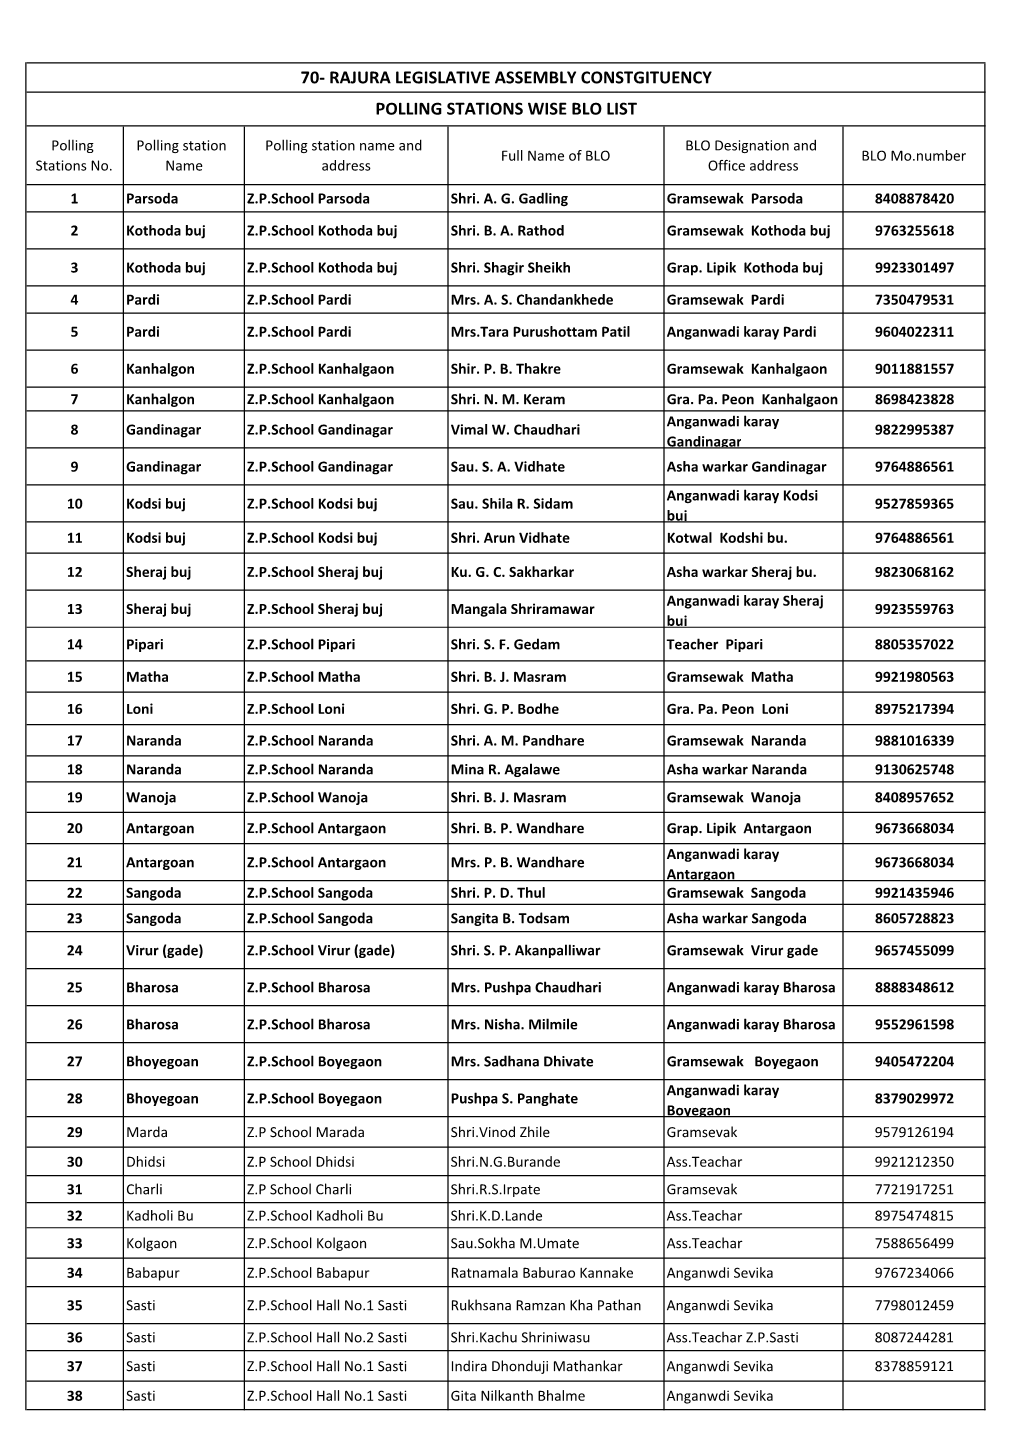 70- Rajura Legislative Assembly Constgituency Polling Stations Wise Blo List